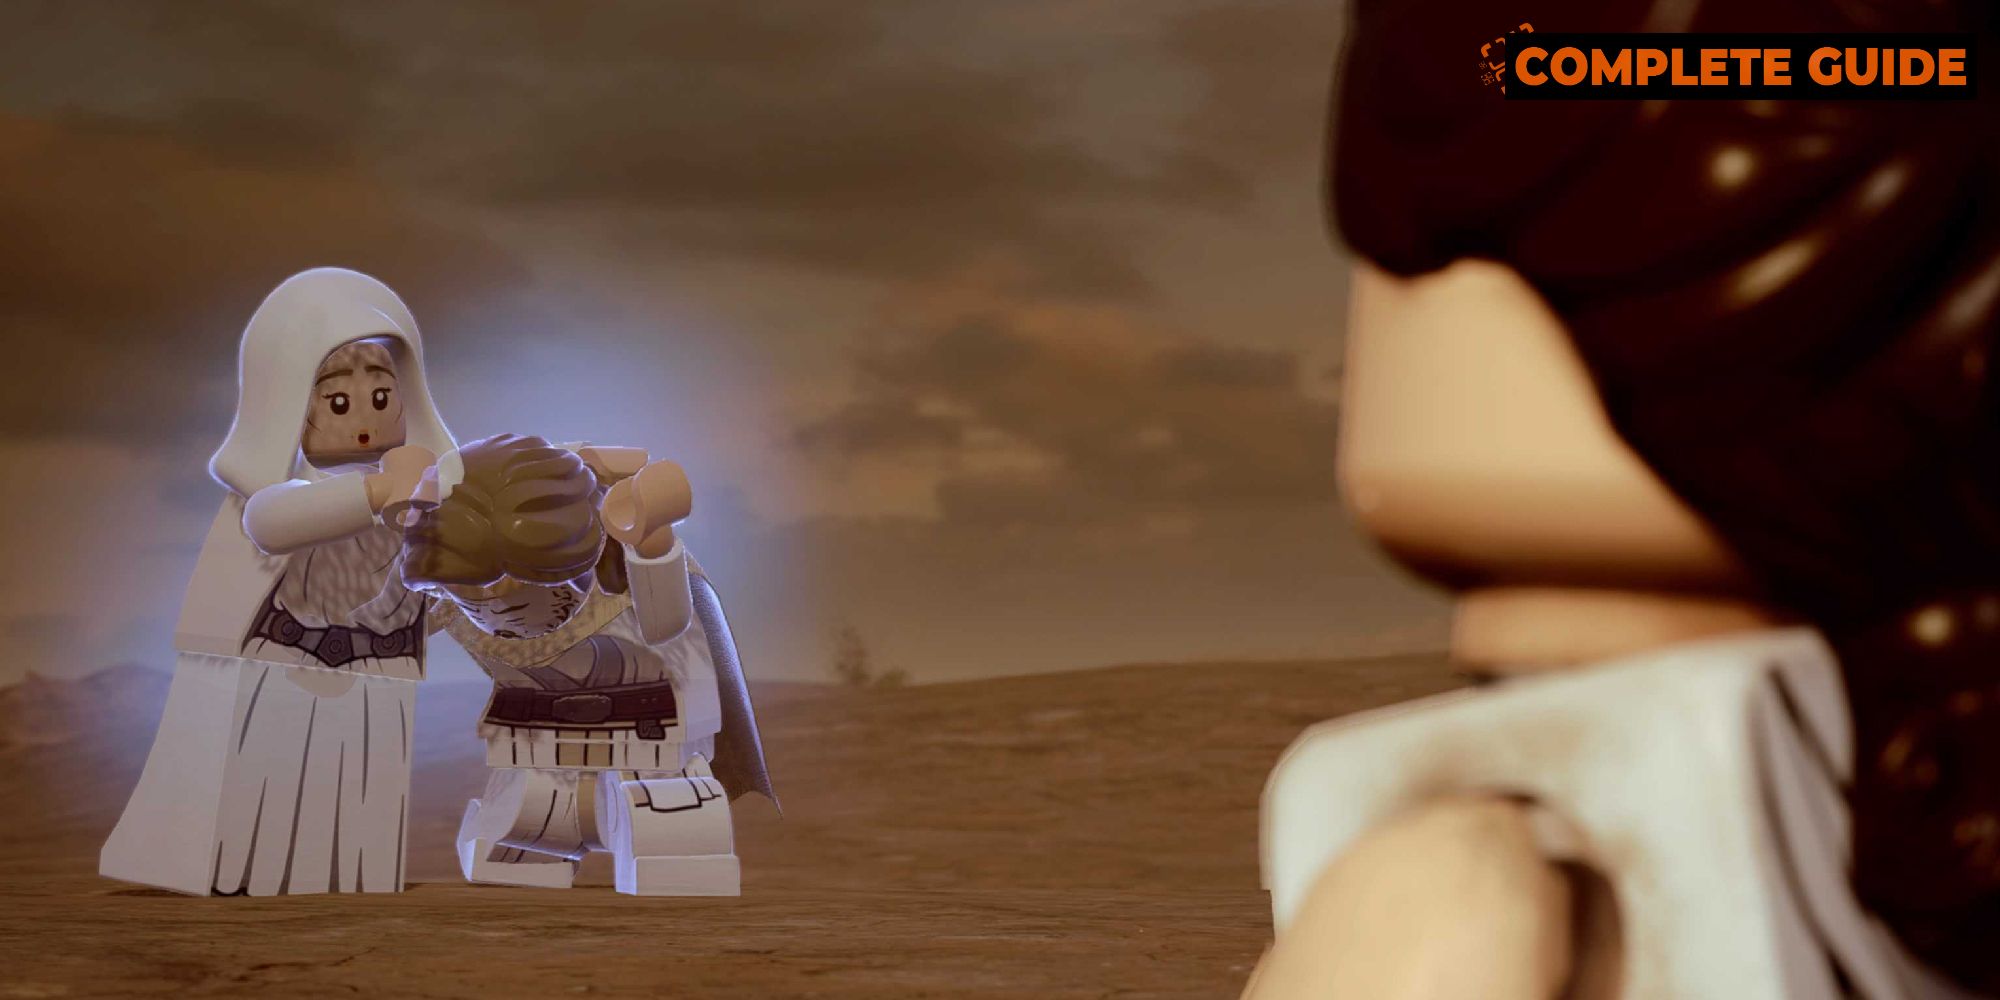 overskydende enke niece Everything You Need To Know About LEGO Star Wars: The Skywalker Saga